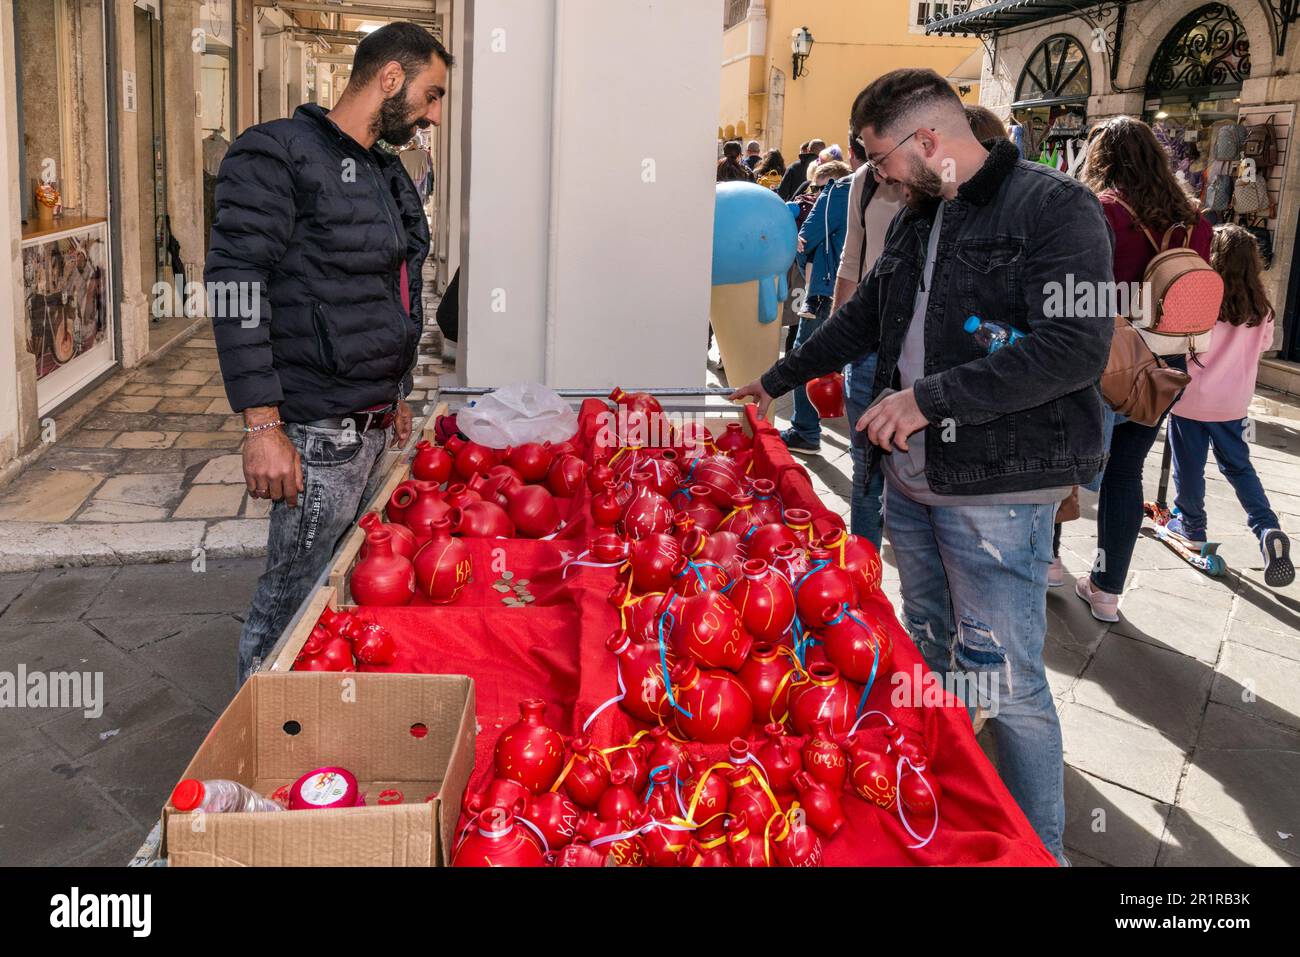 Street stand offering botides, red clay pots, to be broken, dropped from balconies and windows at 11 am on Holy Saturday, signalling Christ's resurrection, Nikiforou Theotoki street in Campiello (Old Town of Corfu) section, in town of Corfu, Corfu Island, Greece Stock Photo